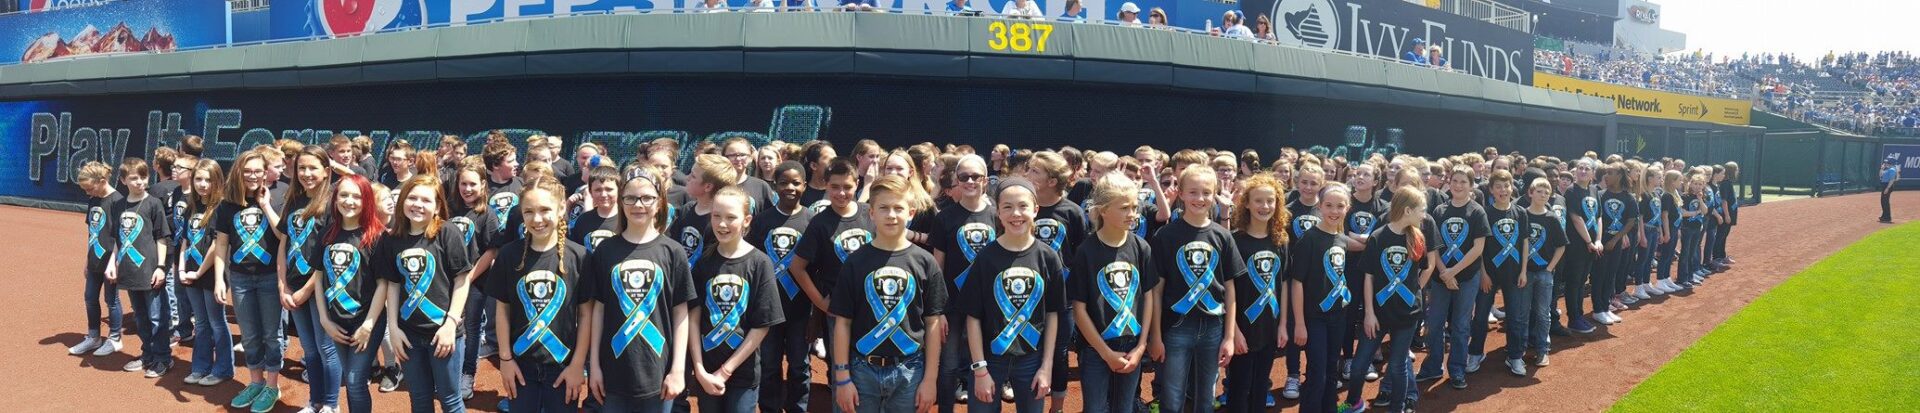 A group of children wearing blue ribbons on their shirts.